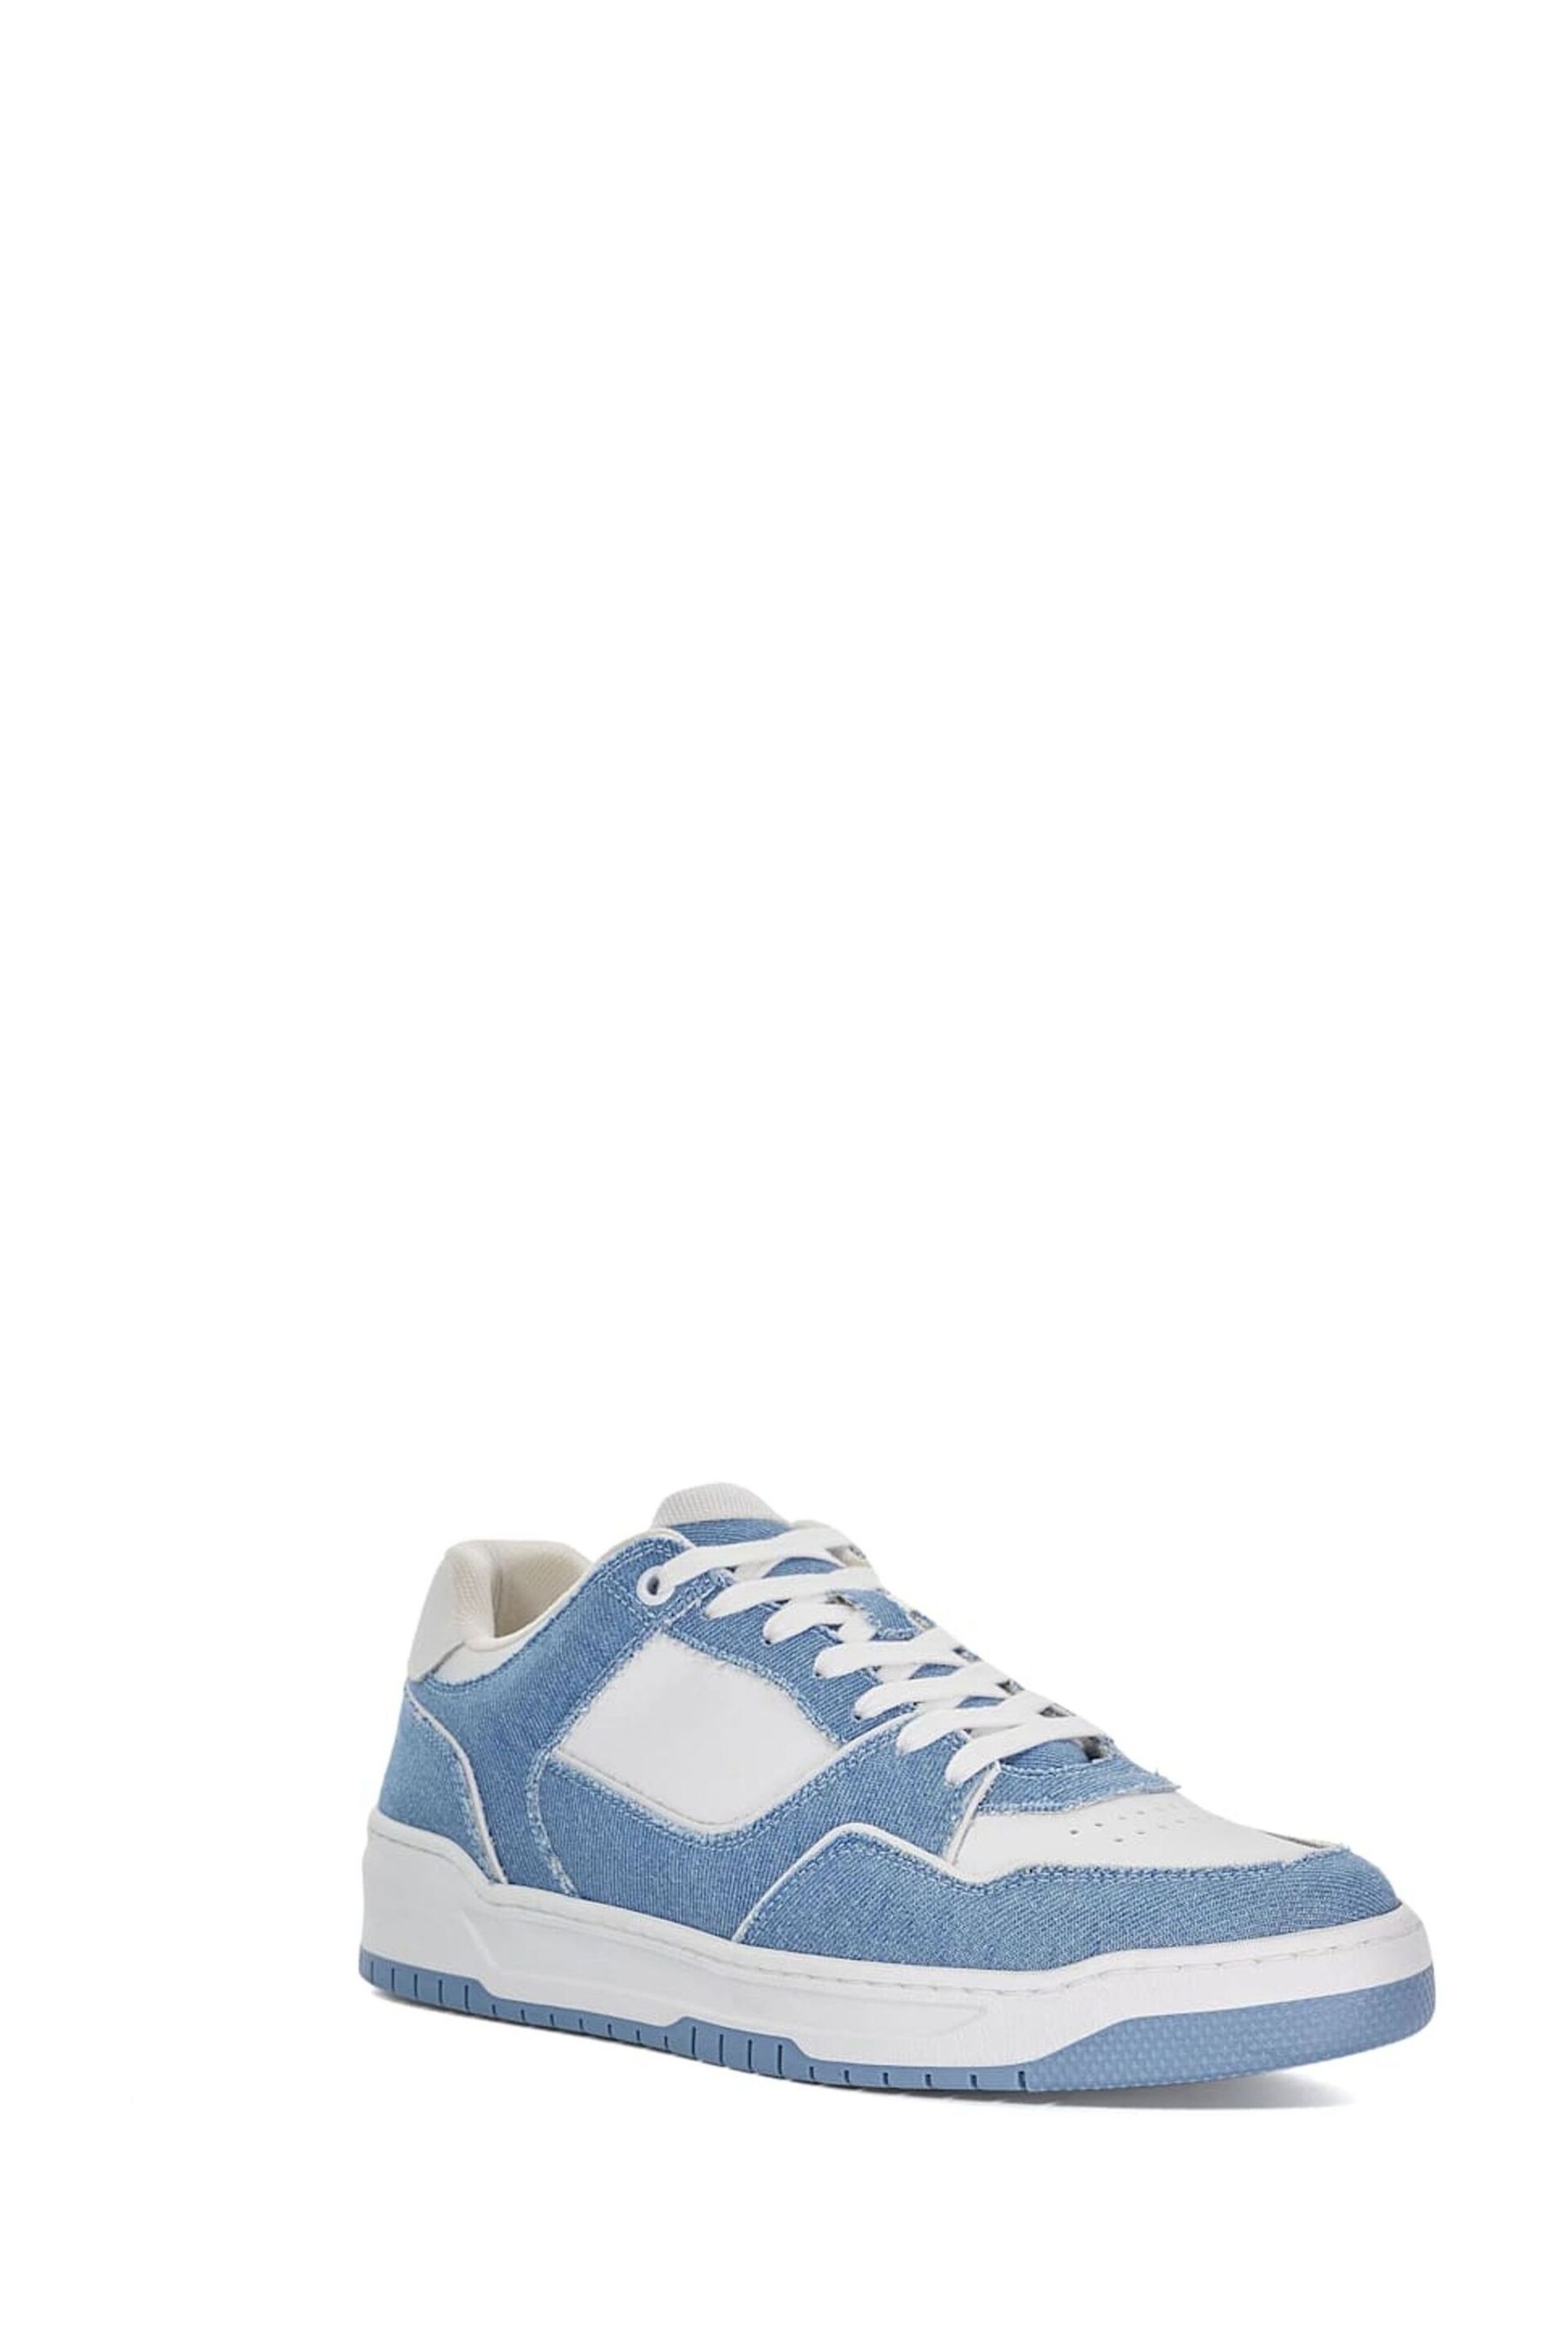 Dune London Blue Tainted Chunky Court Trainers - Image 1 of 6